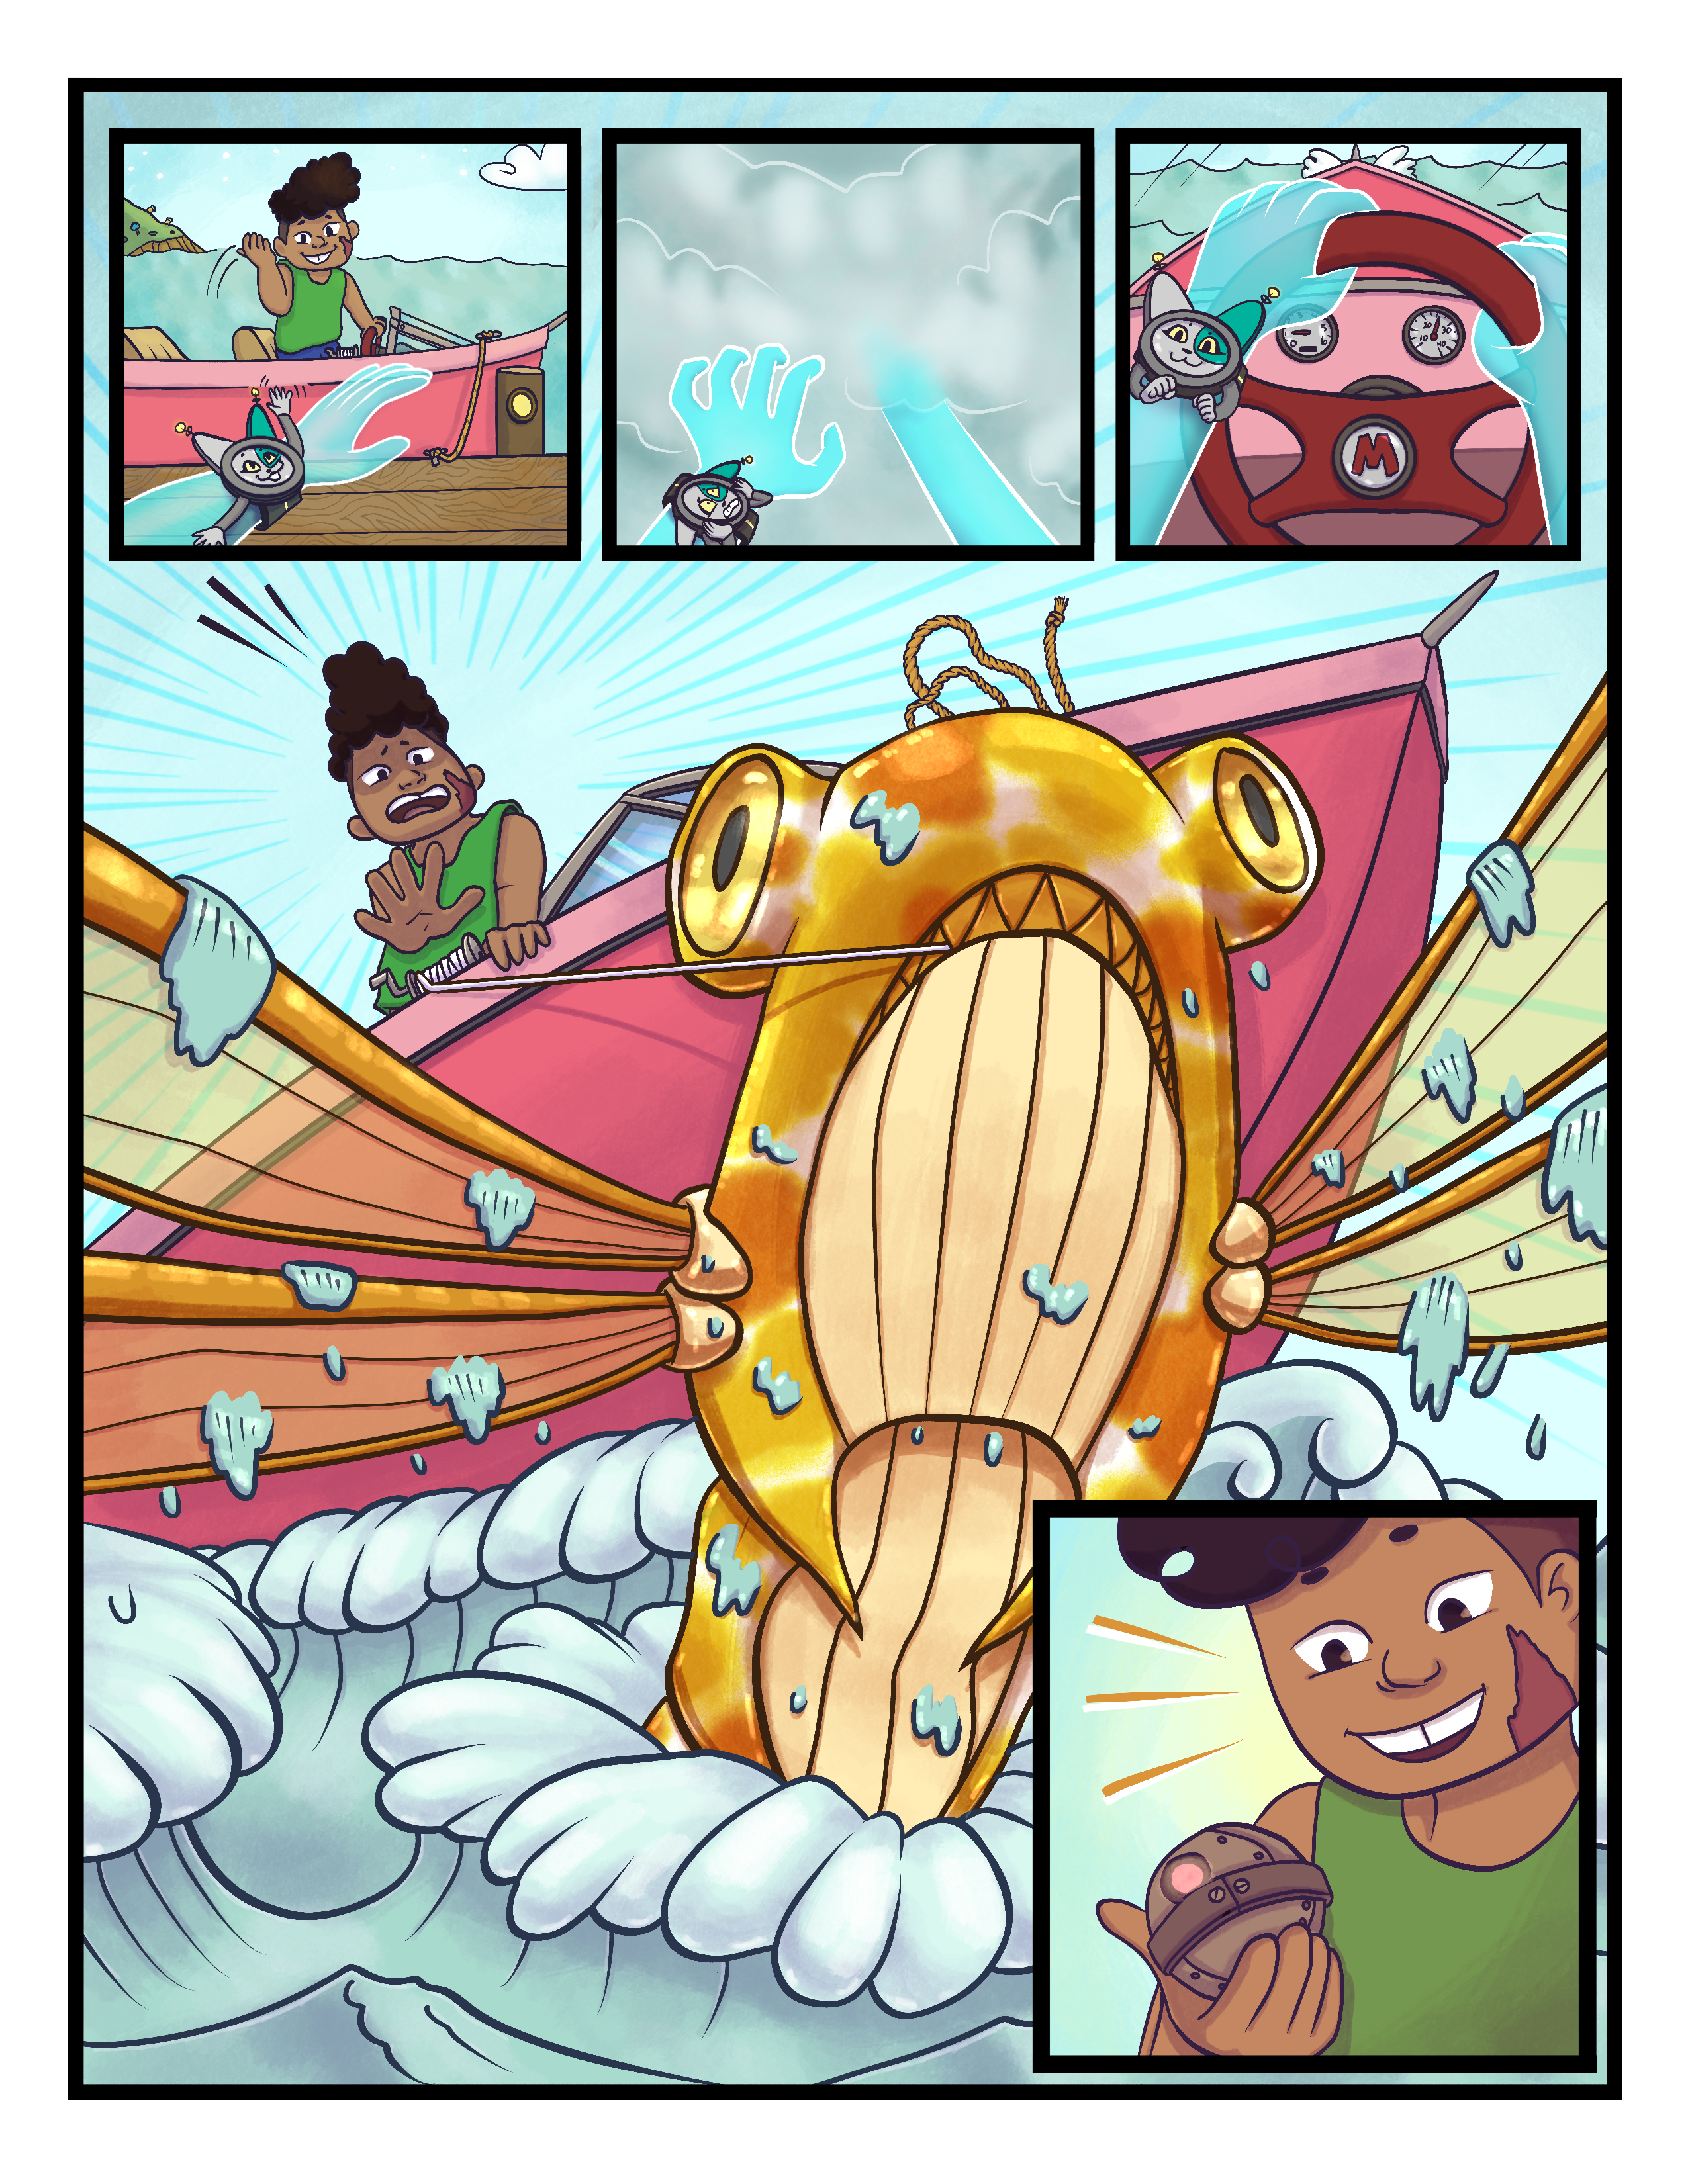 The drive success version of the Docks comic page!